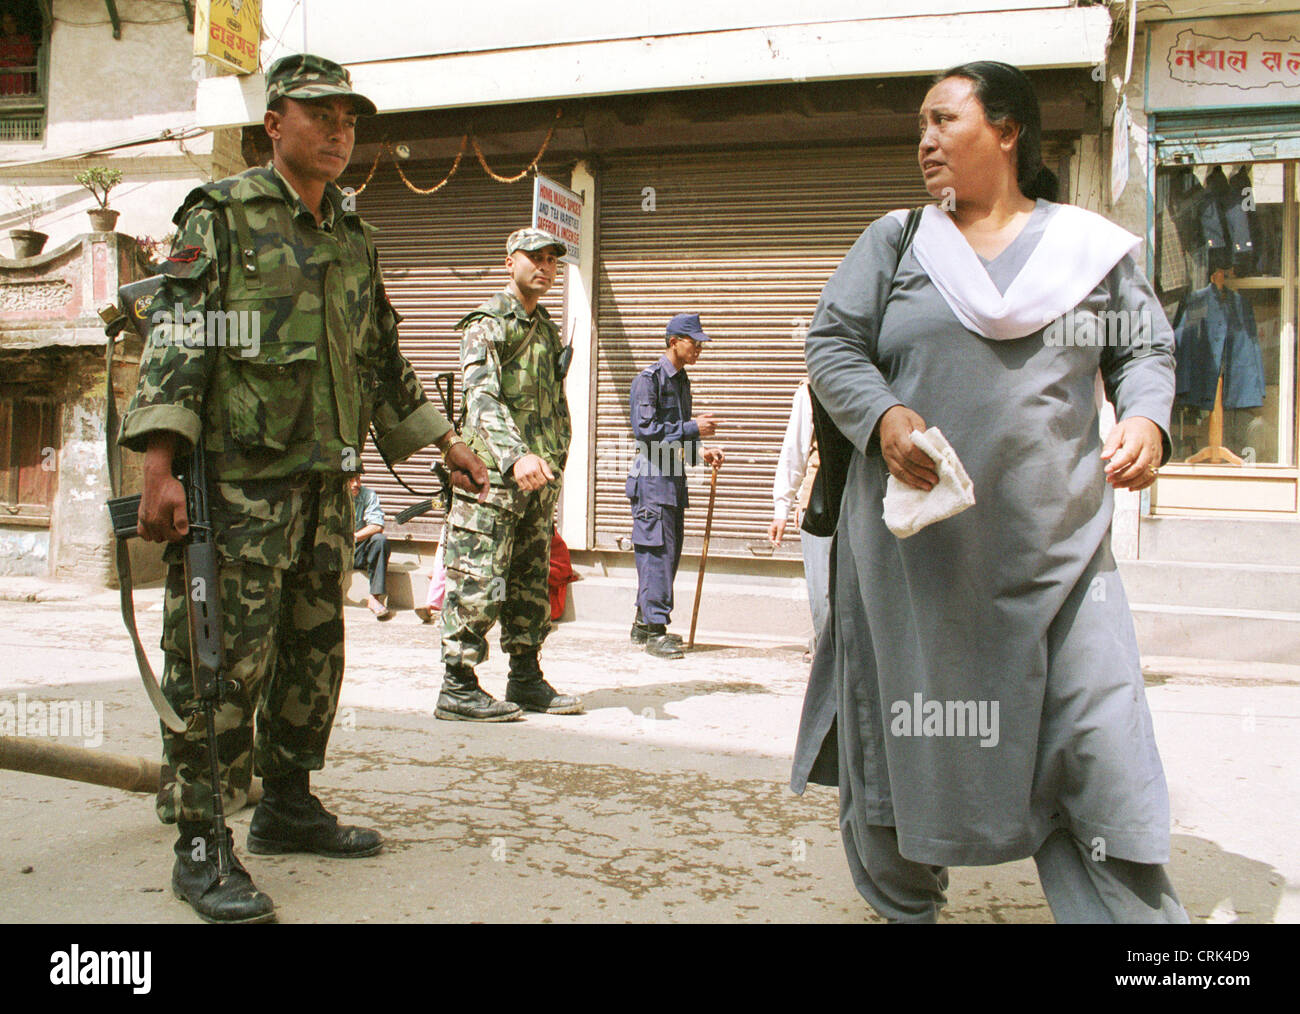 Army and civilian population in Nepal Stock Photo